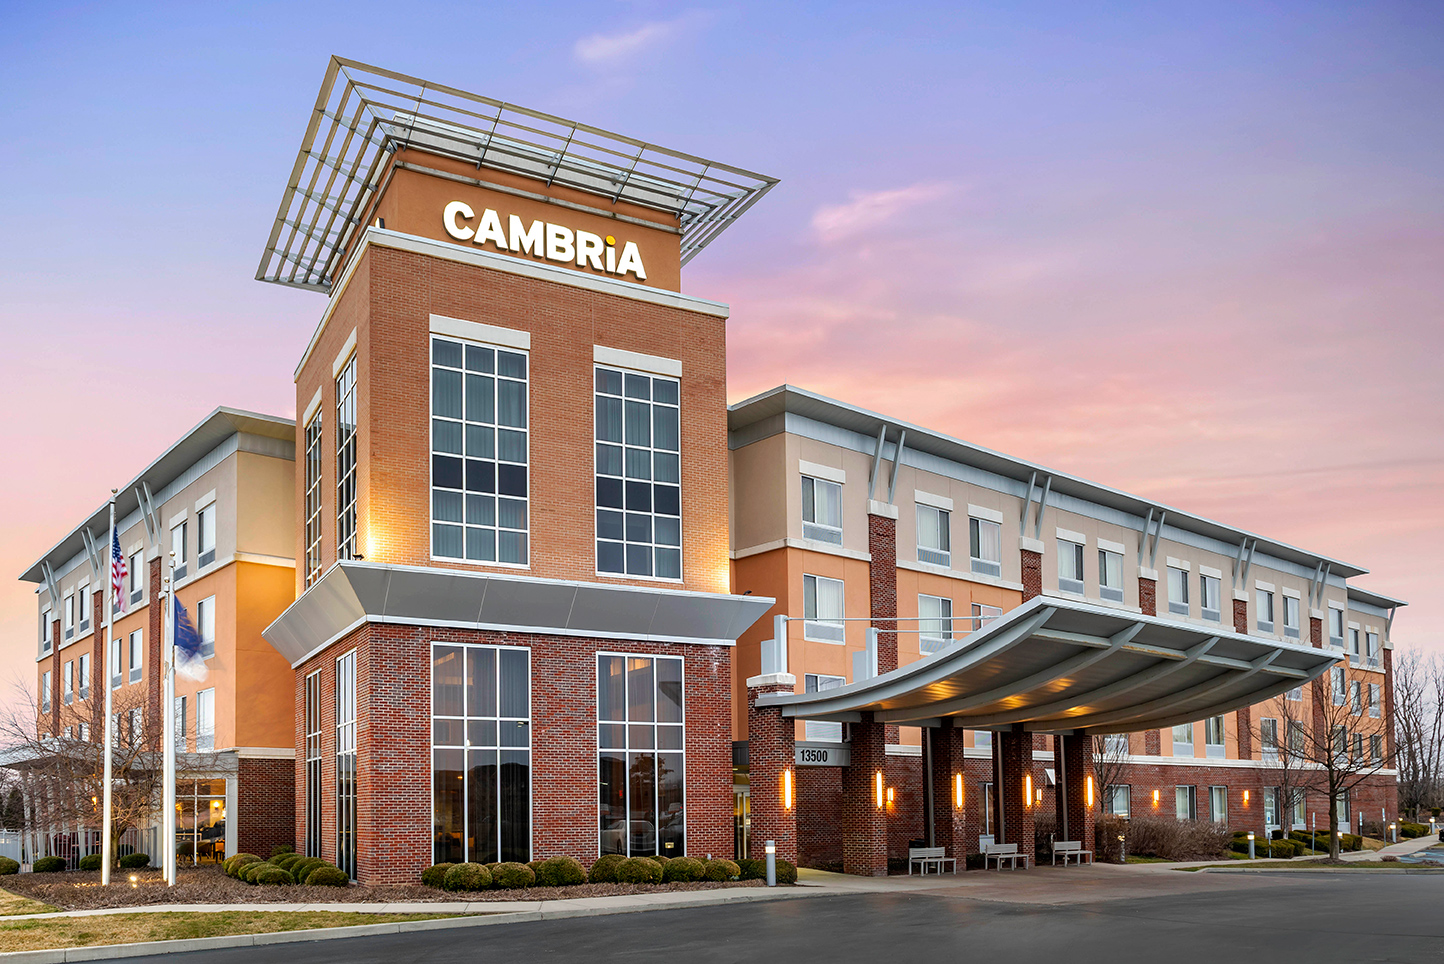 Cambria Hotel Exterior at Sunset